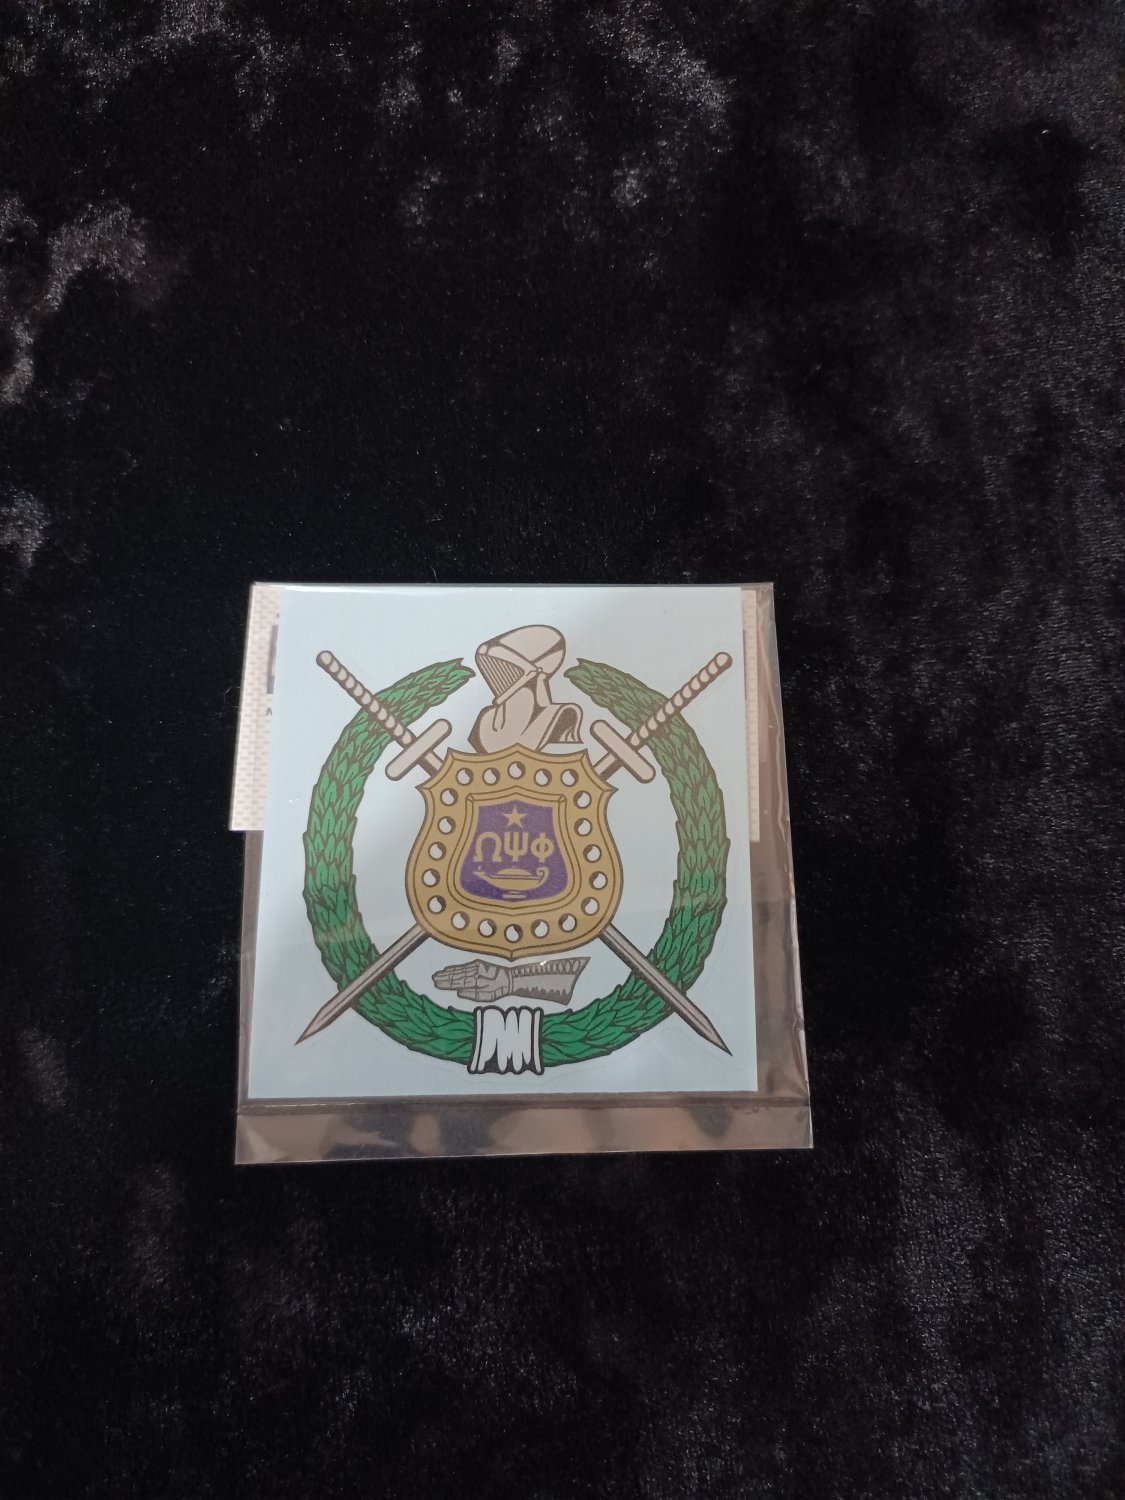 Omega Psi Phi Fraternity Decal Stickers